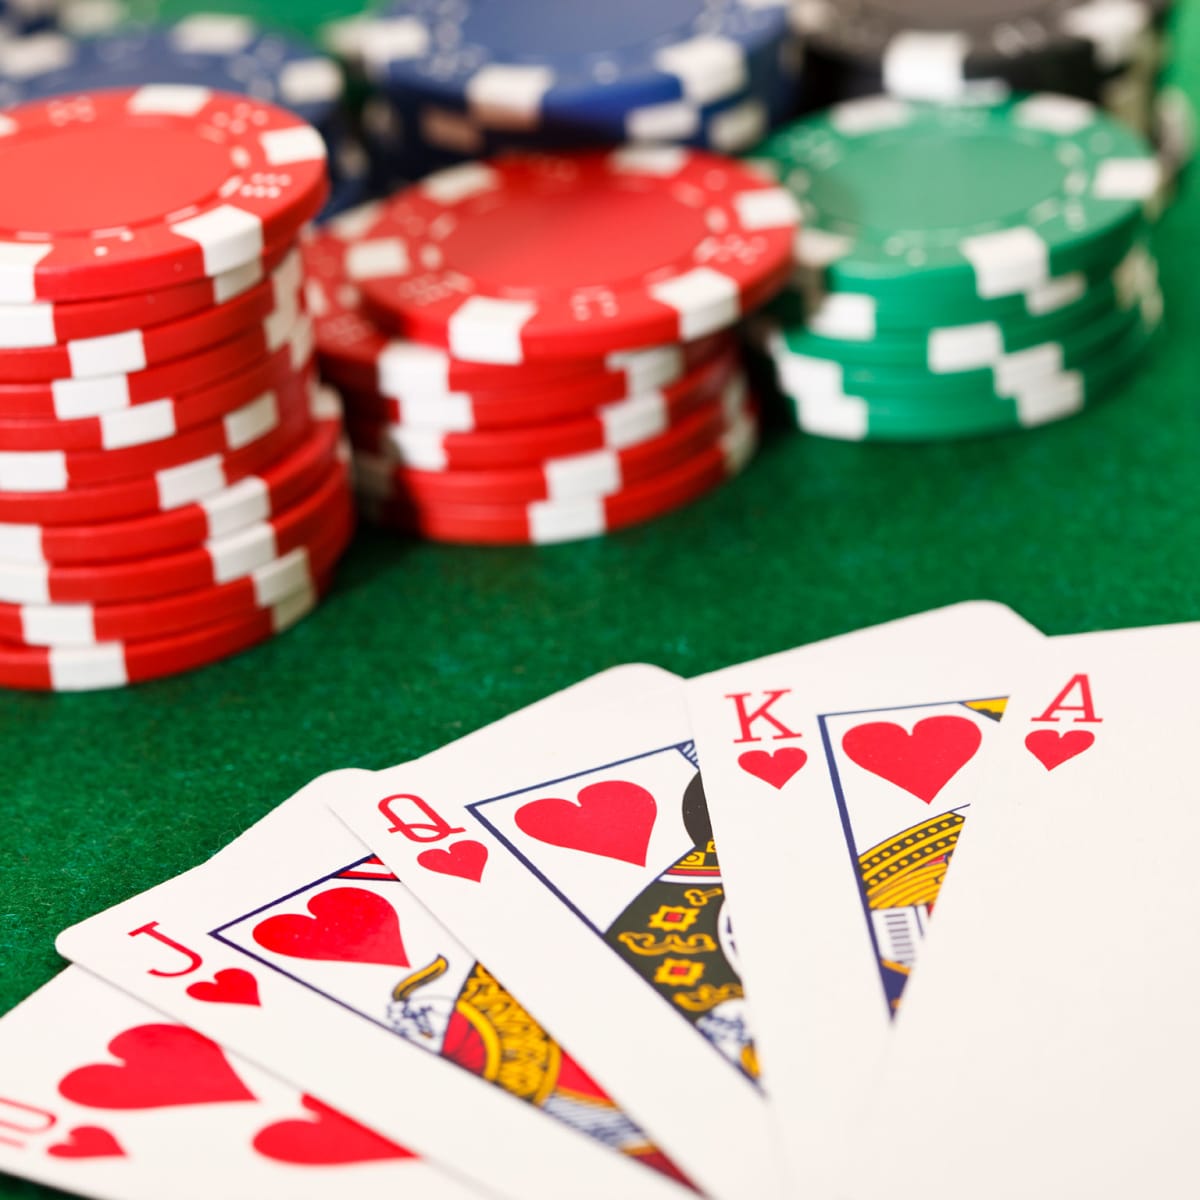 If you've never played in a poker tournament in an online casino before, here are a few common mistakes that every starting player makes.